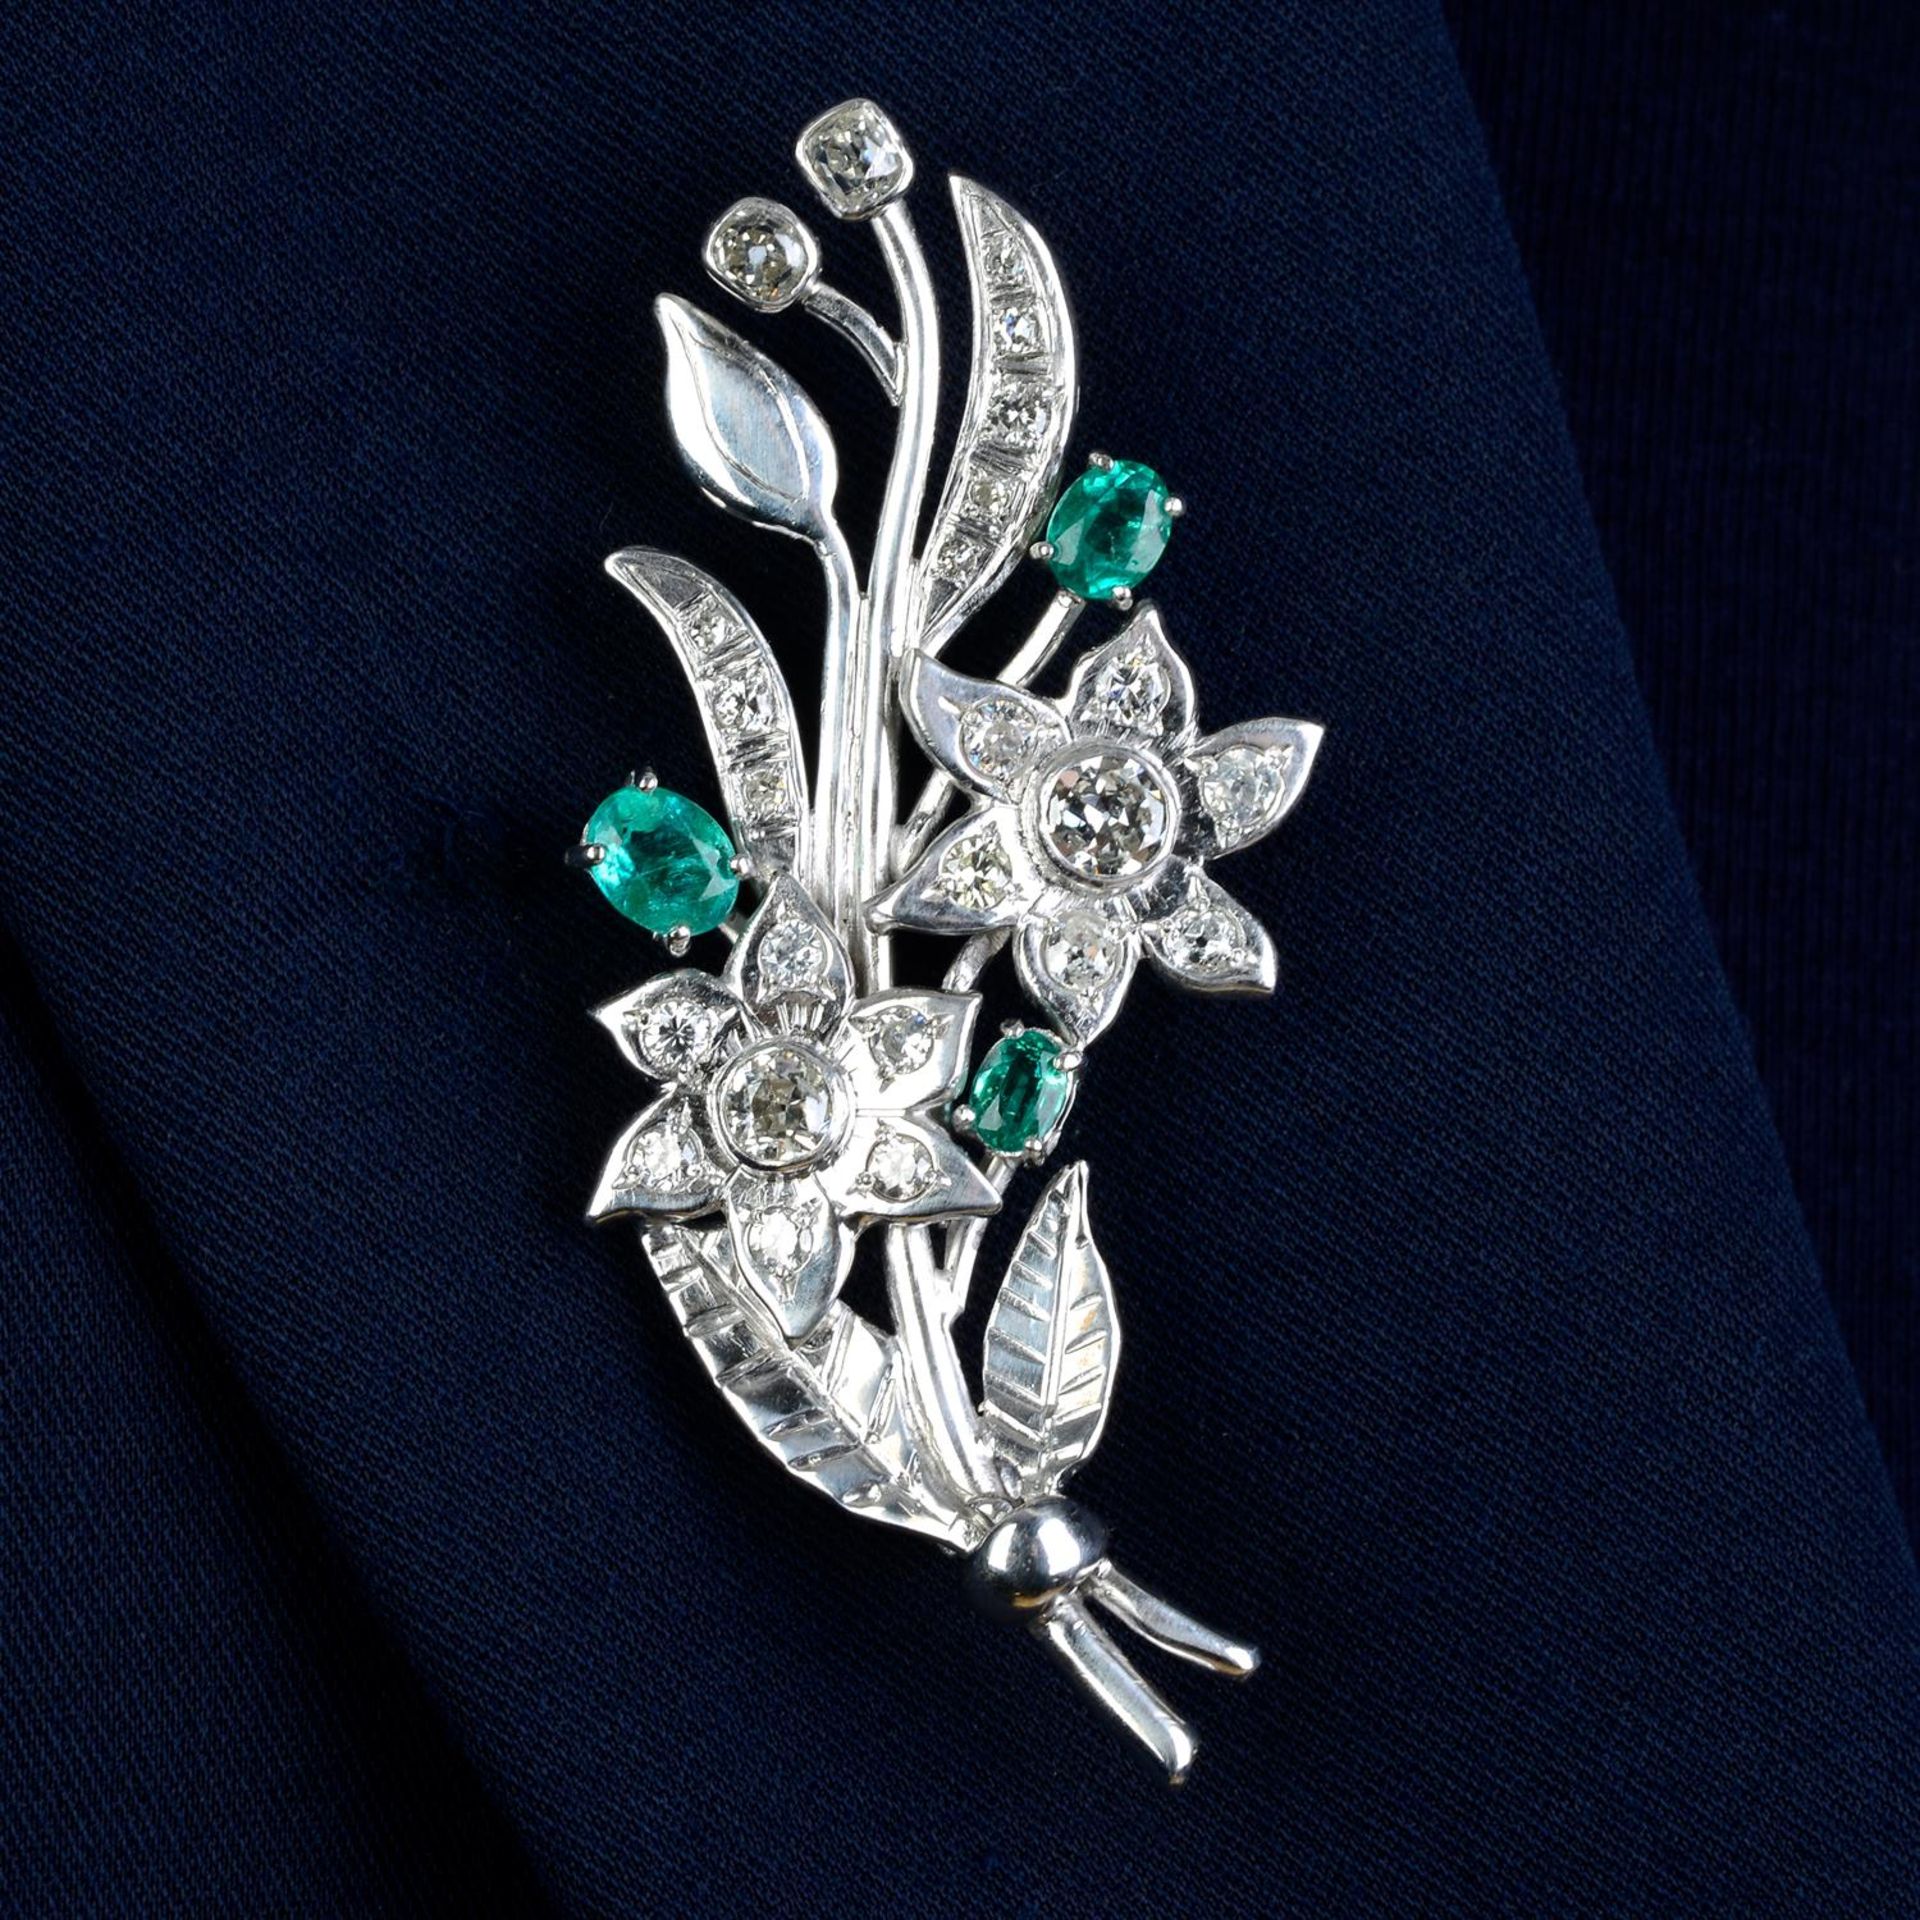 An 18ct gold diamond and emerald floral brooch.